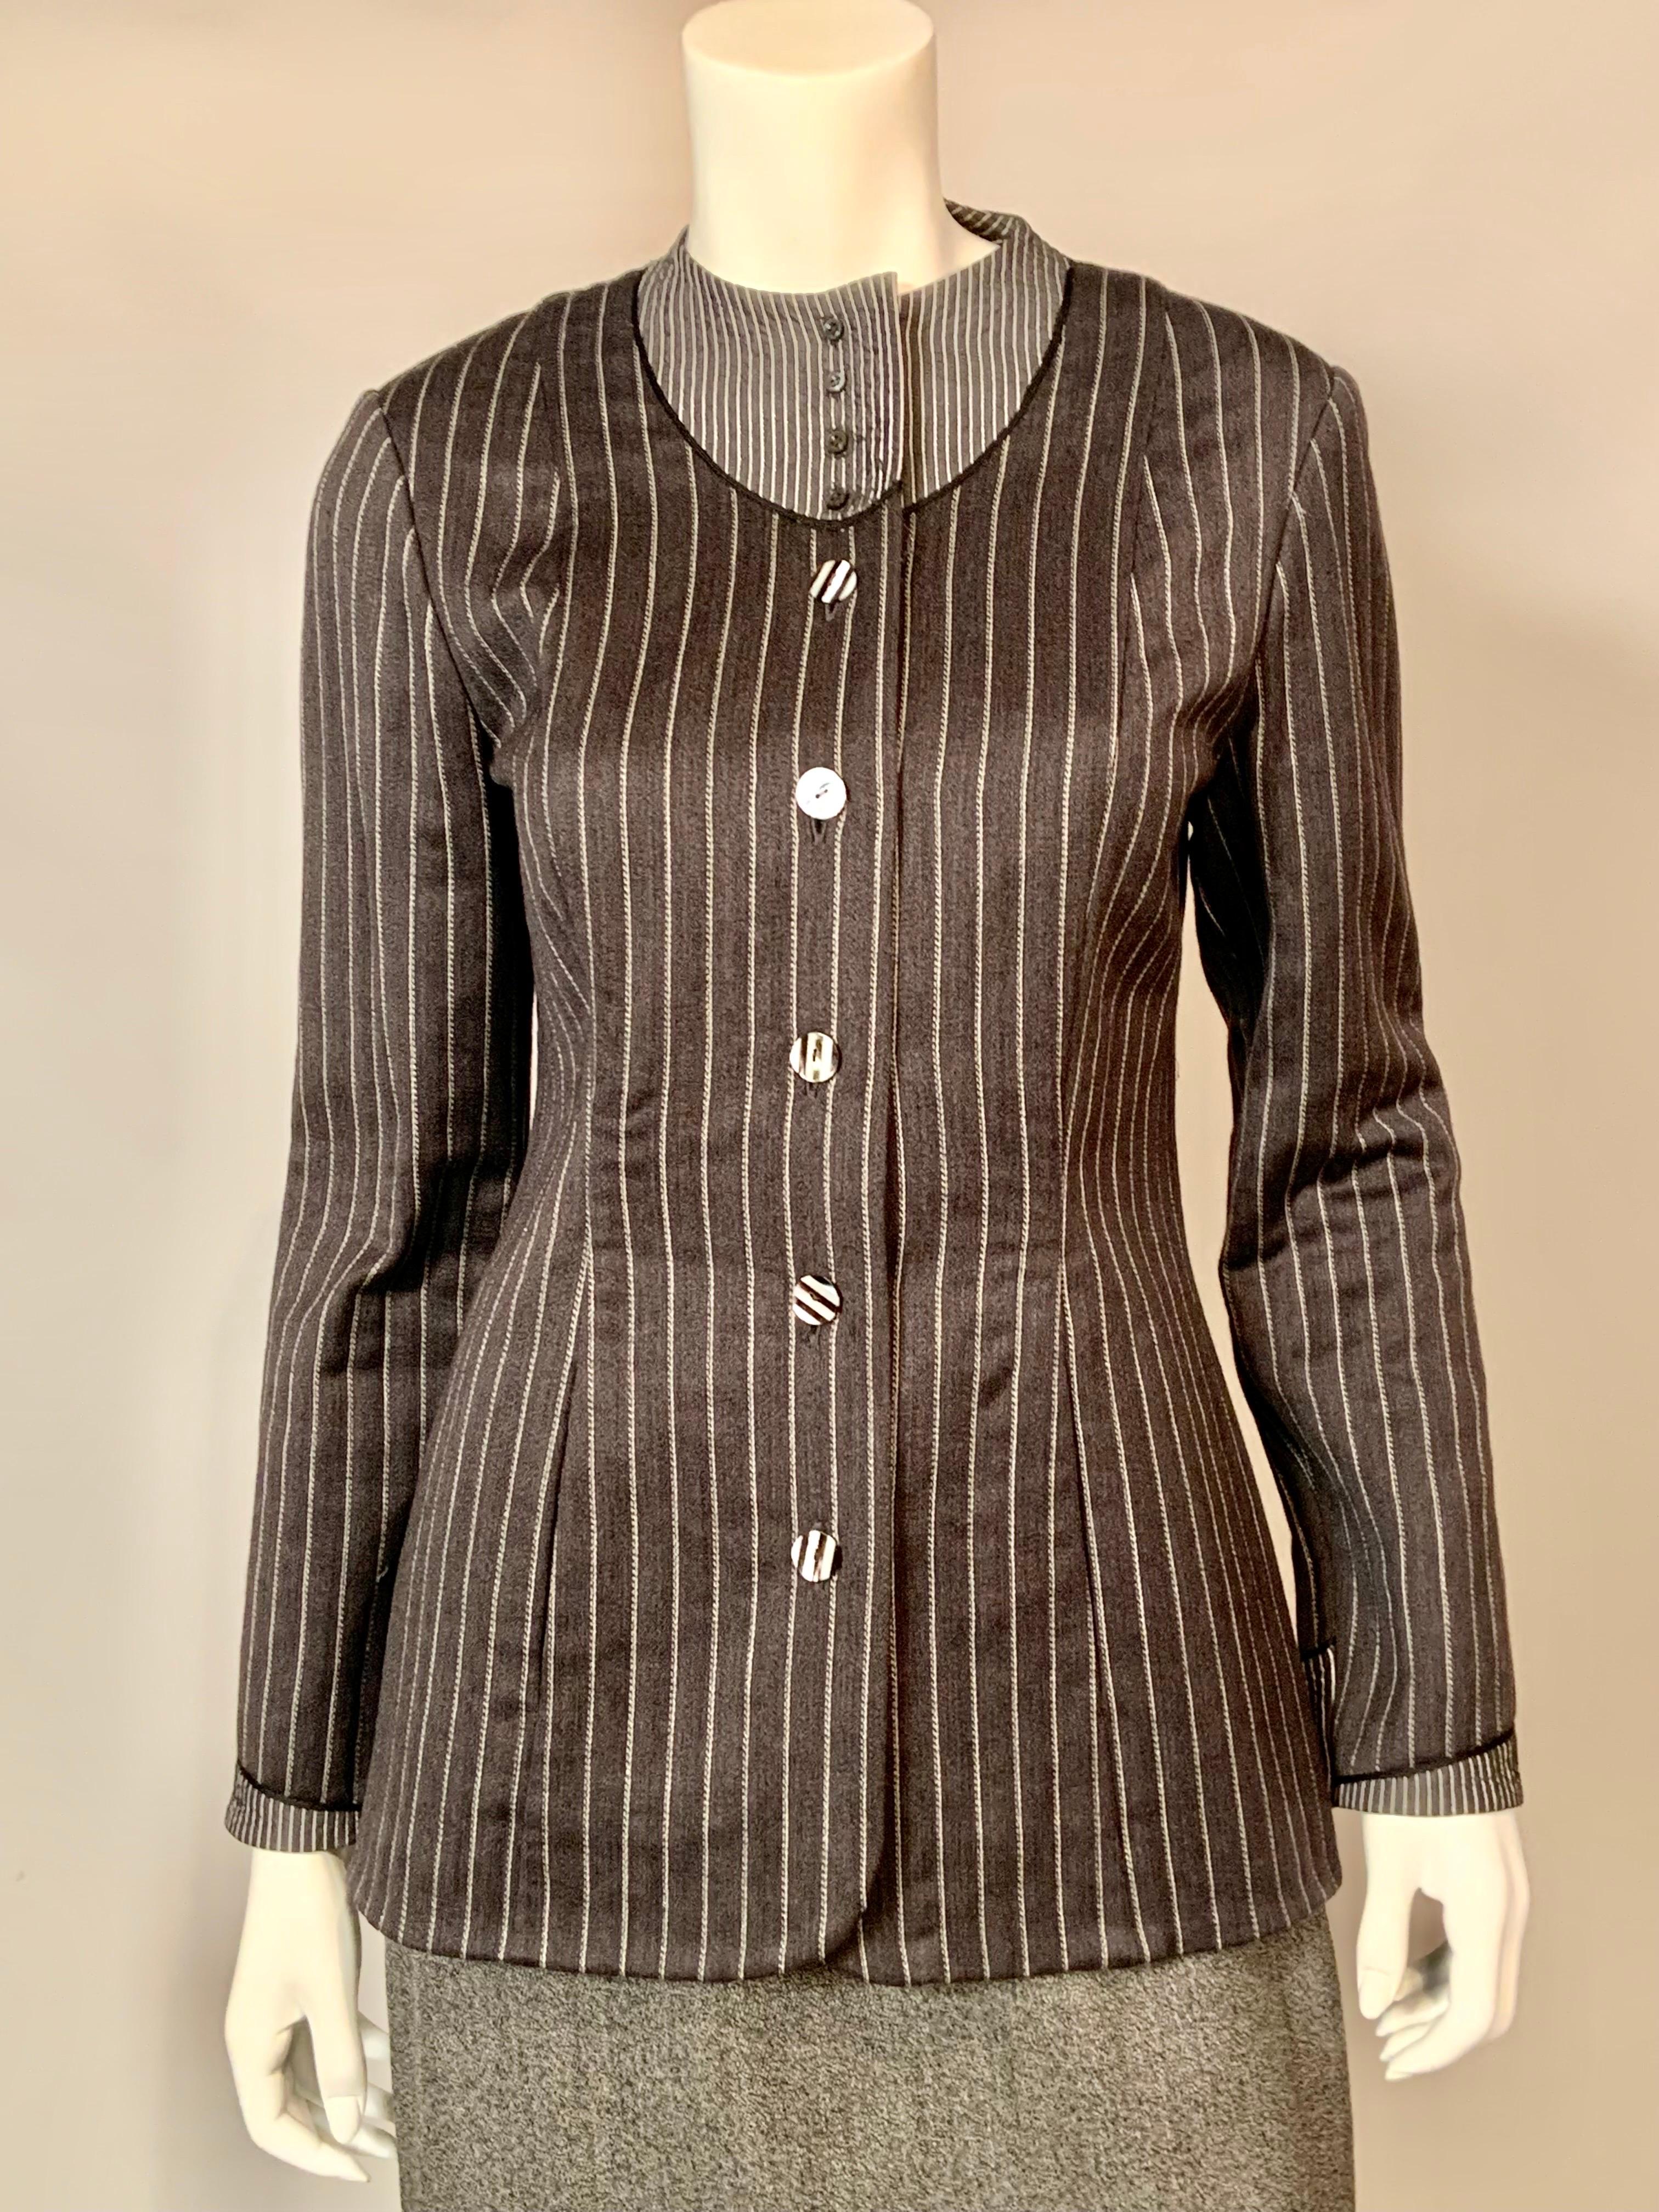 This suit is a stunning example of the work of Geoffrey Beene and his inspired way of using fabrics. The jacket is made from charcoal grey, light weight wool with woven white pinstripes.  The collar and cuffs are grey cotton with a woven metallic